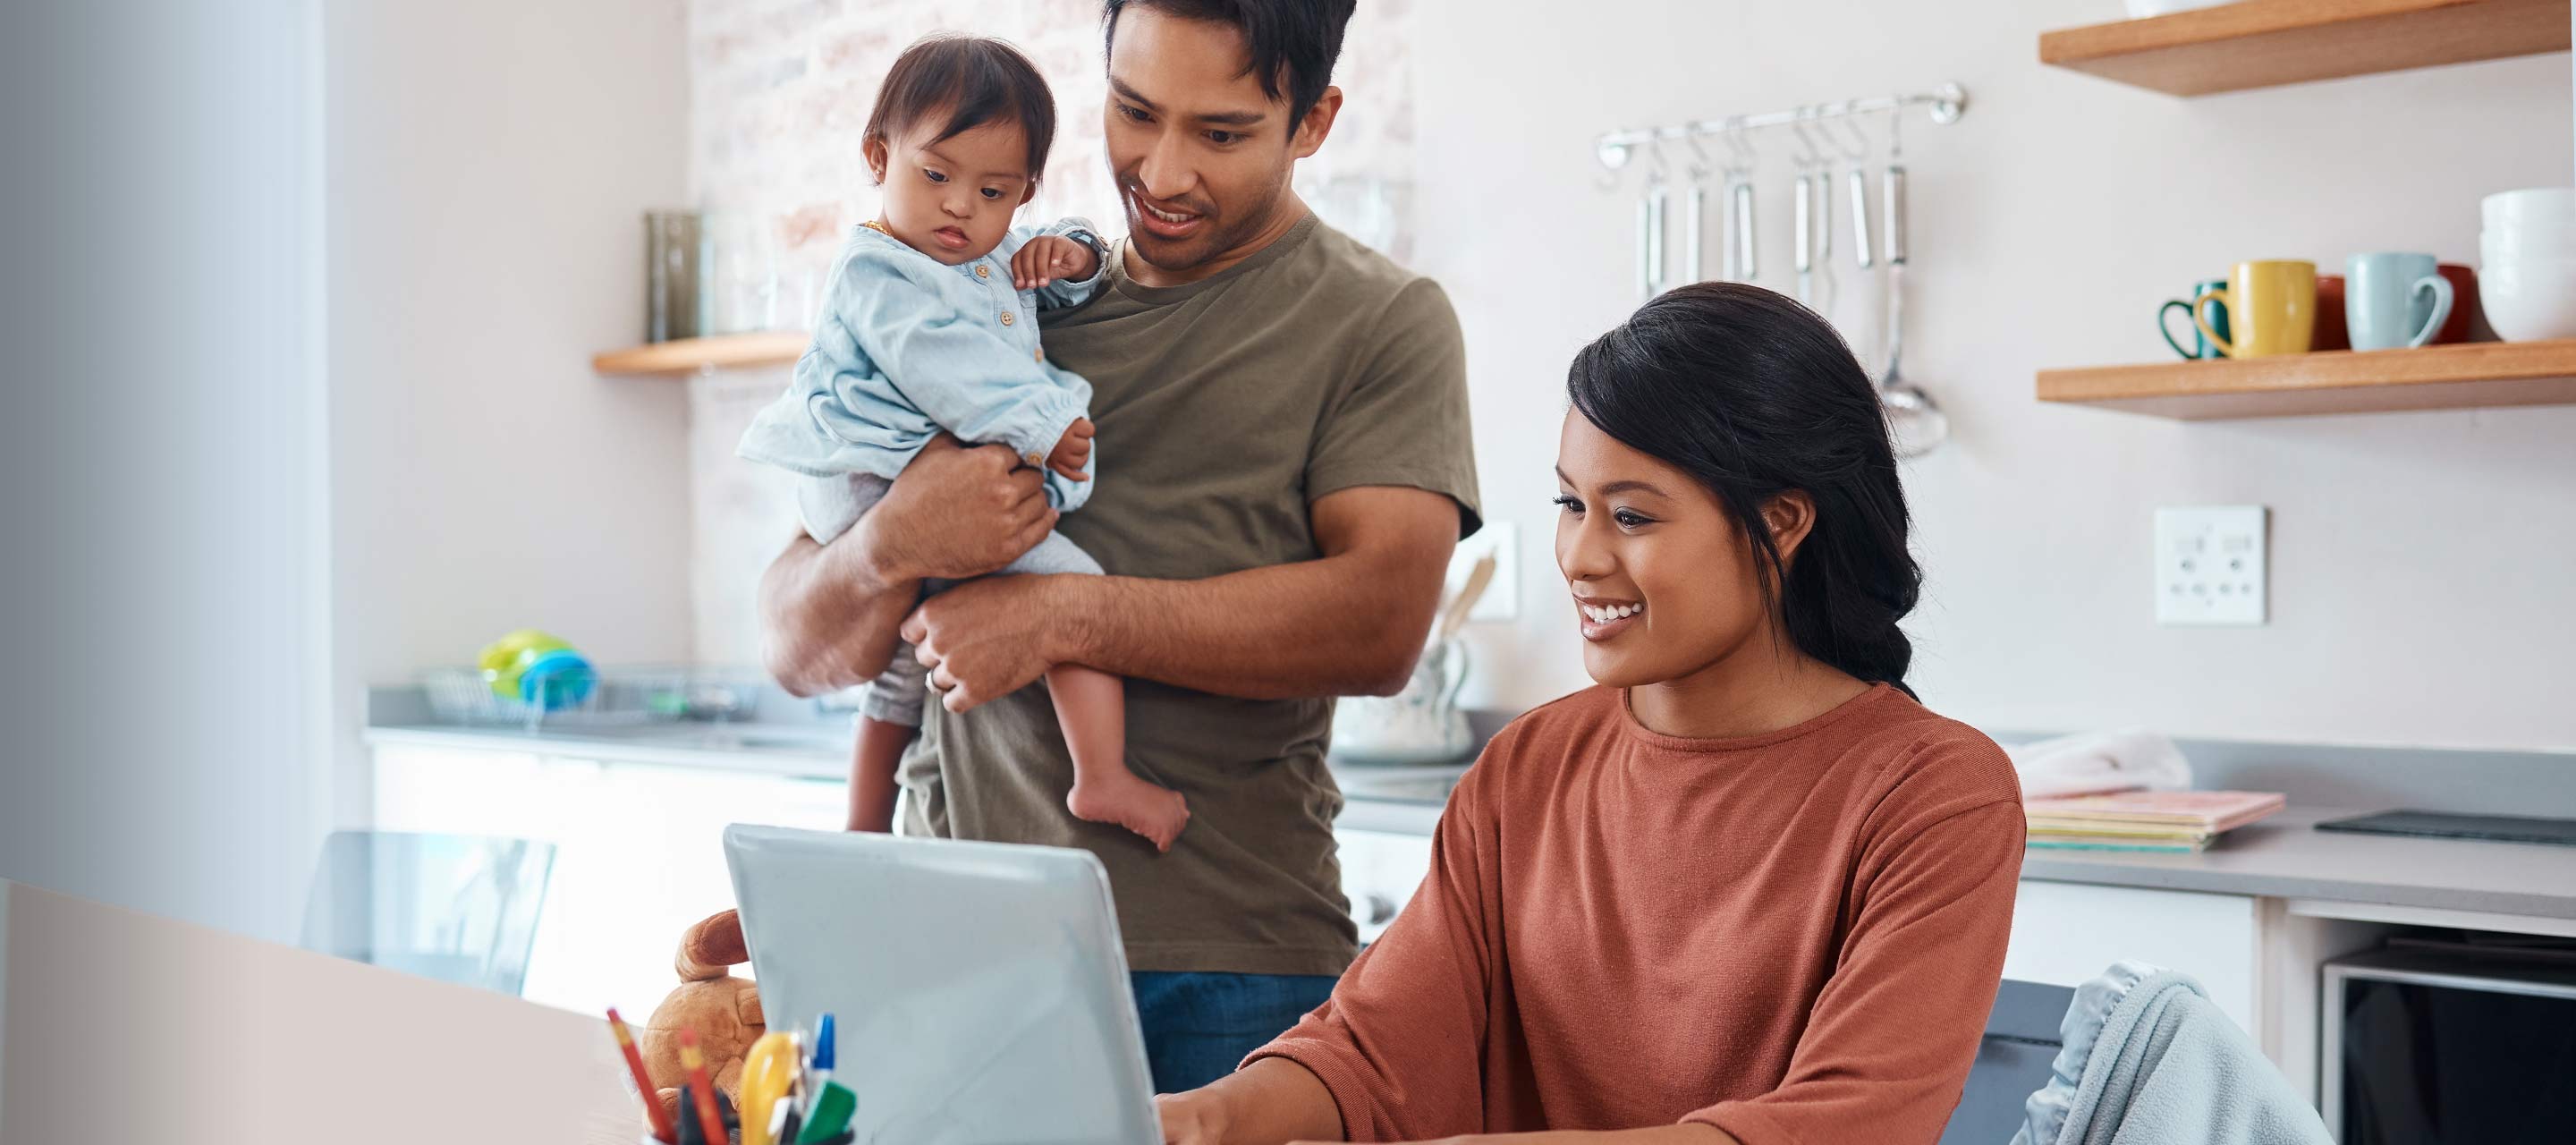 A woman is sat at the table while her husband stands next to her, holding their child. They are looking at the laptop screen.